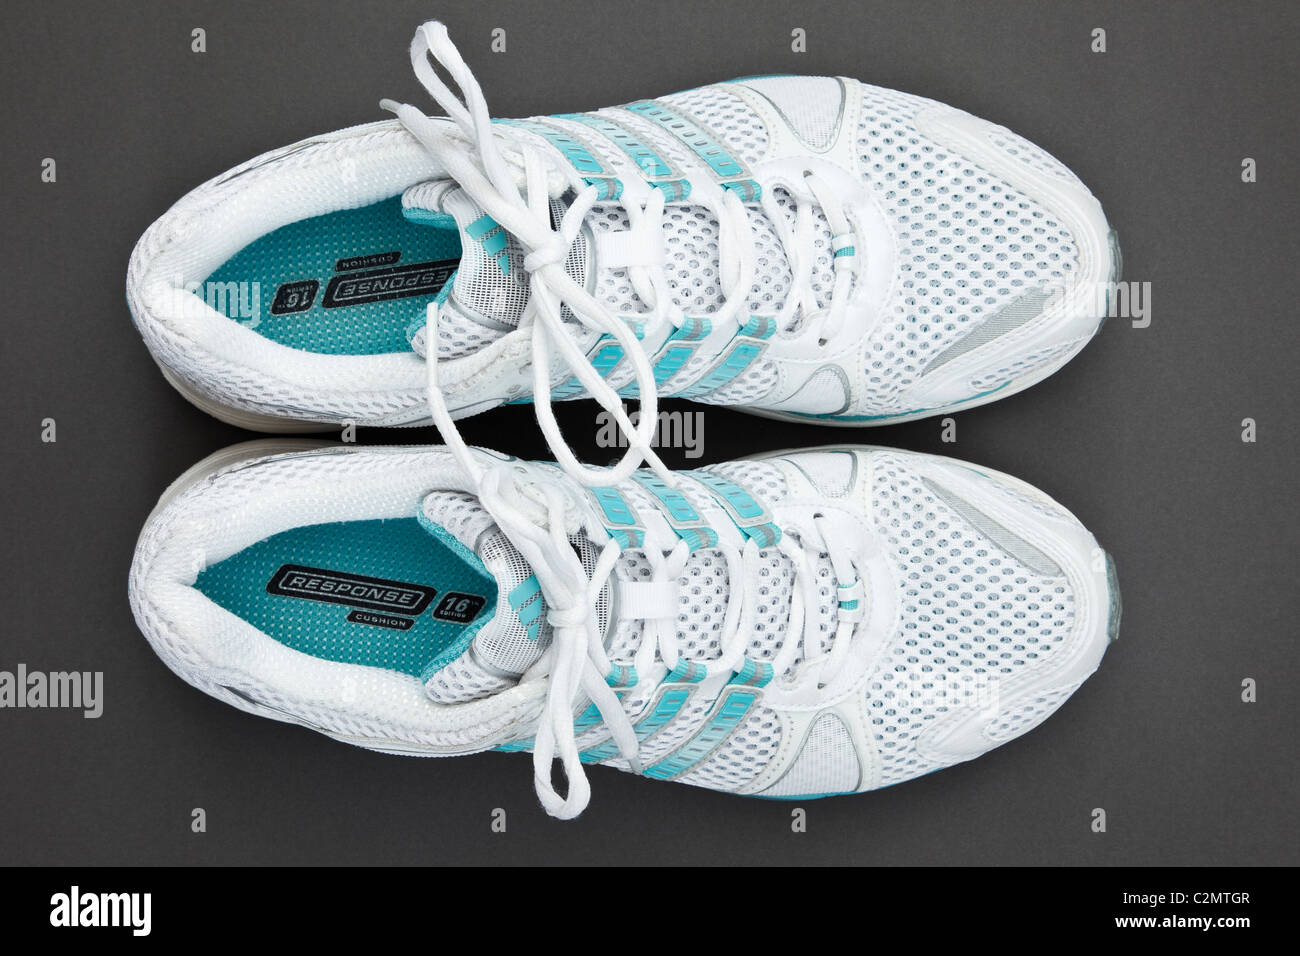 A pair of women's new white and blue Adidas air cushion trainers sneakers with laces tied on a dark grey background from overhead. England UK Britain Stock Photo